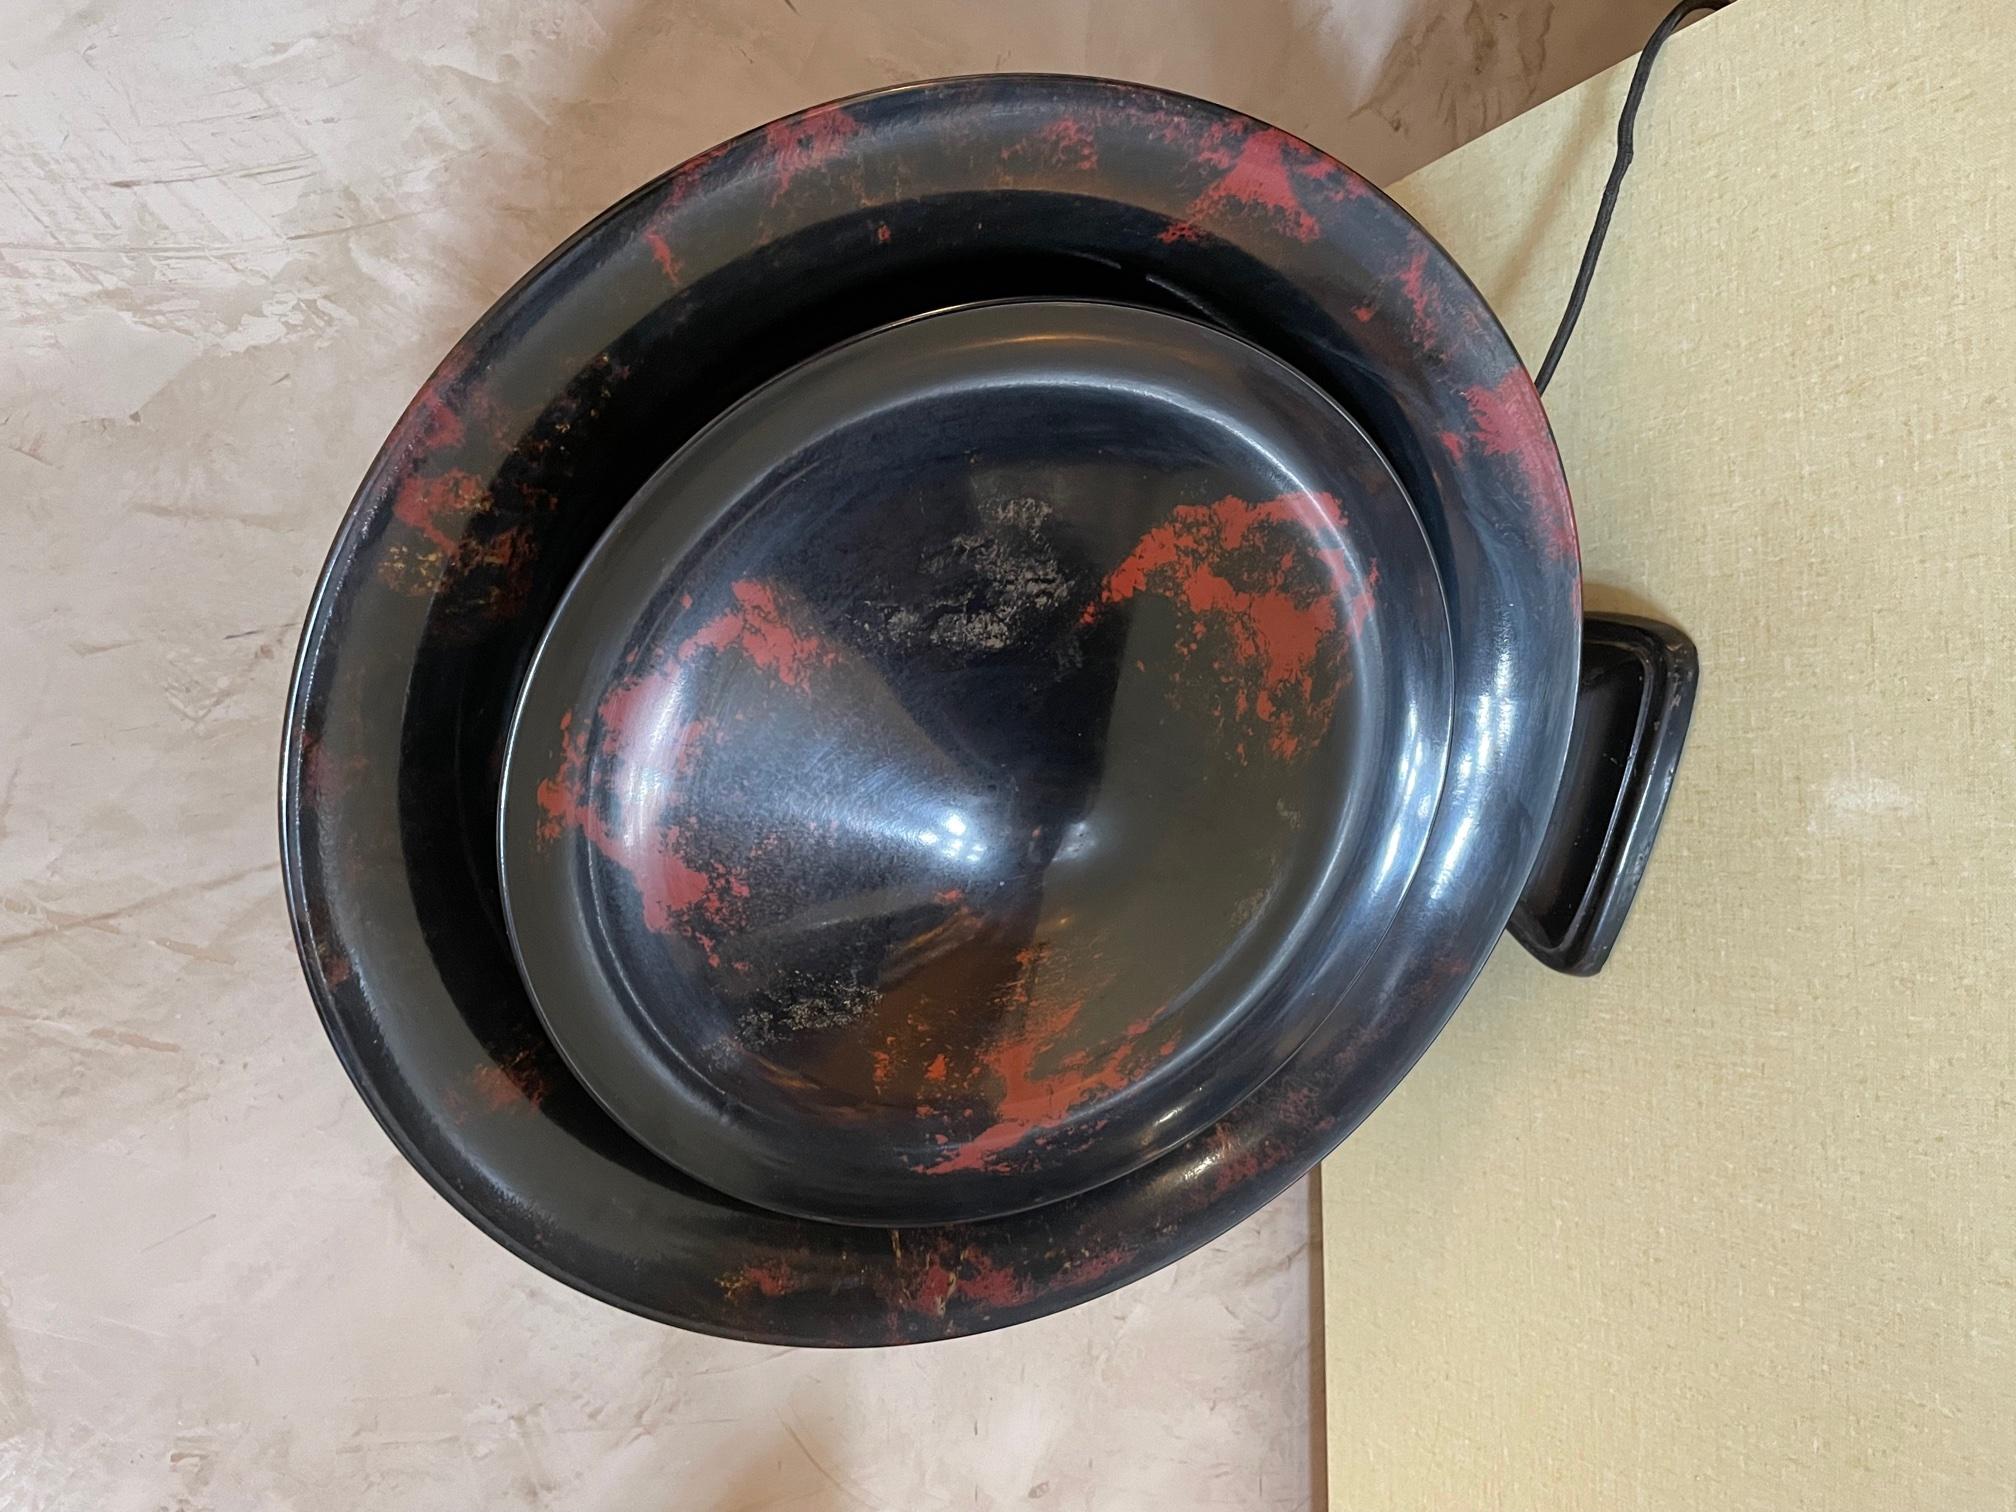 Bakelite speaker designed by Louis Kalff for famous Dutch electronics manufacturer Philips in the late 1920s. The model are often referred to as 